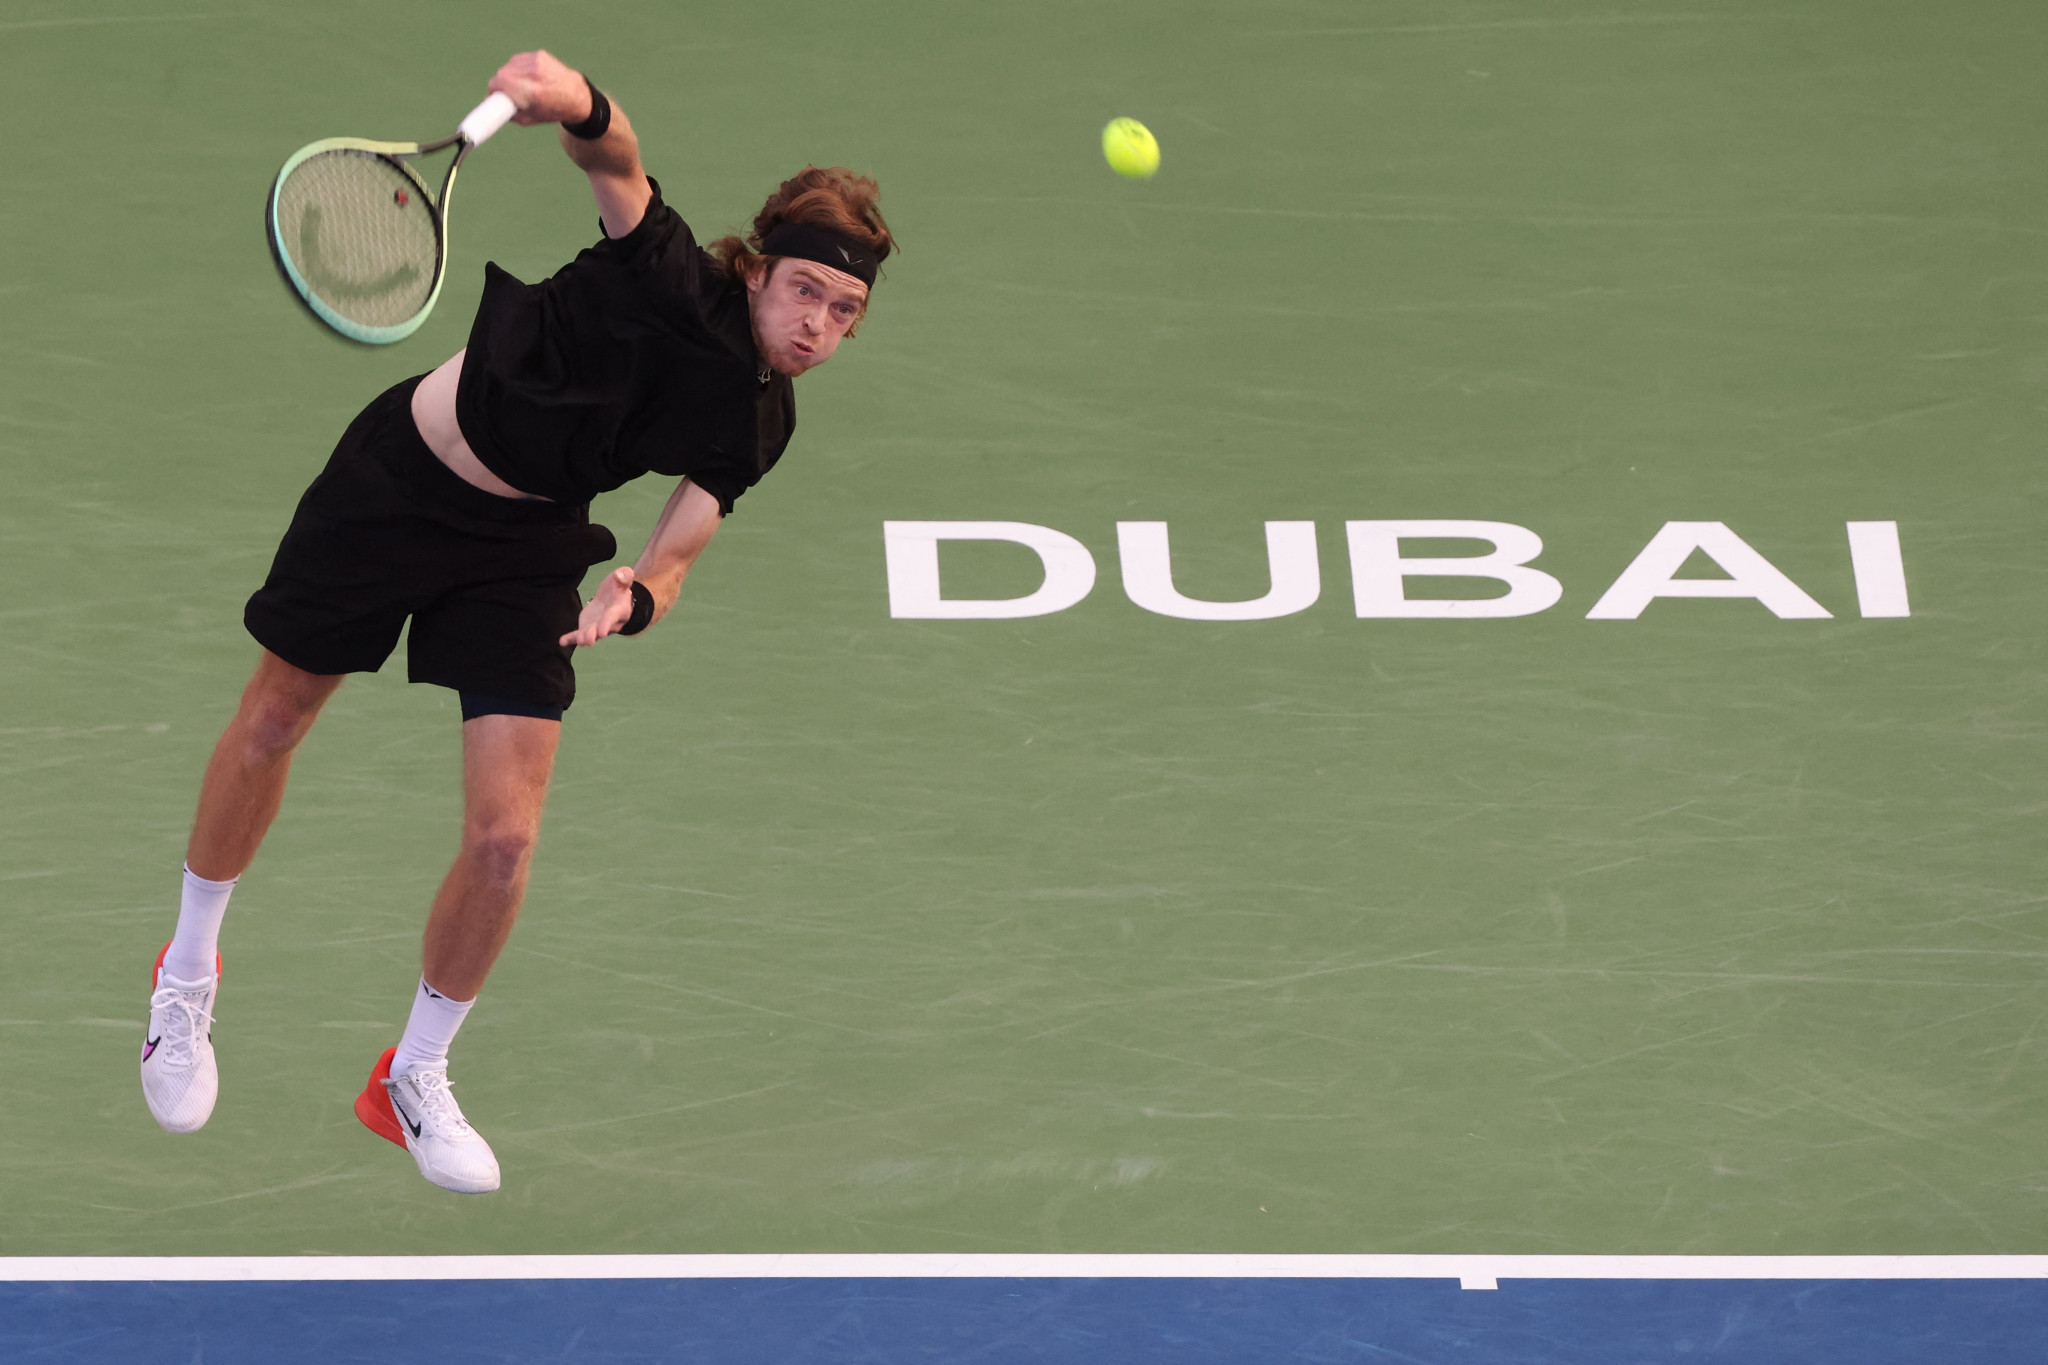 Rublev repeats call for peace in Ukraine at Dubai Tennis Championships